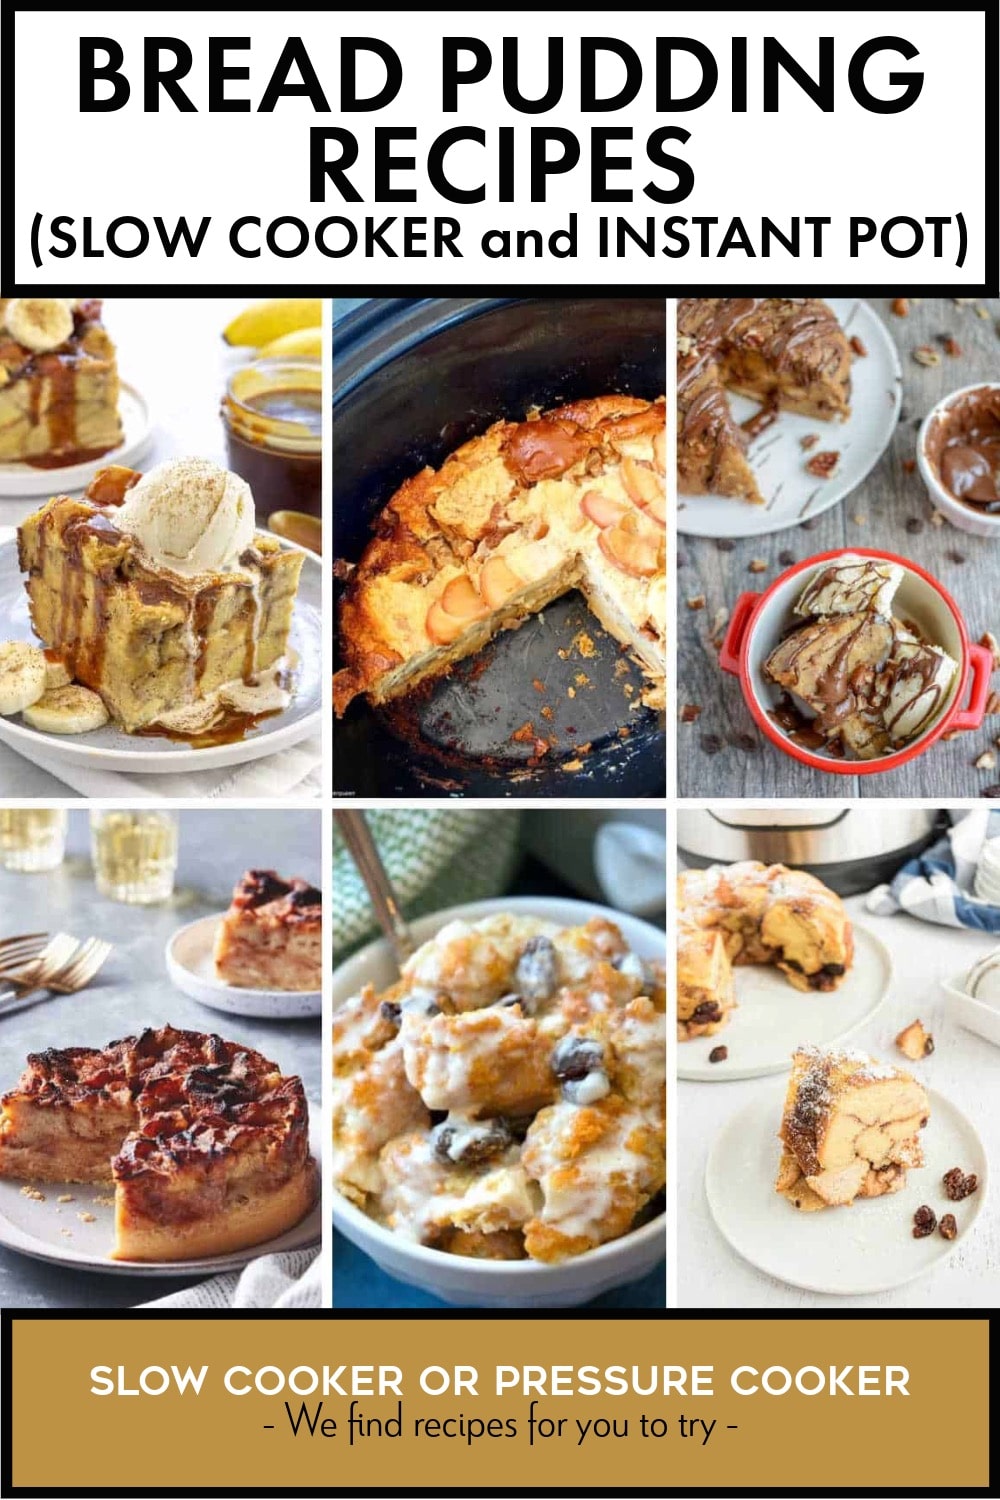 Pinterest image of Bread Pudding Recipes (Slow Cooker and Instant Pot)